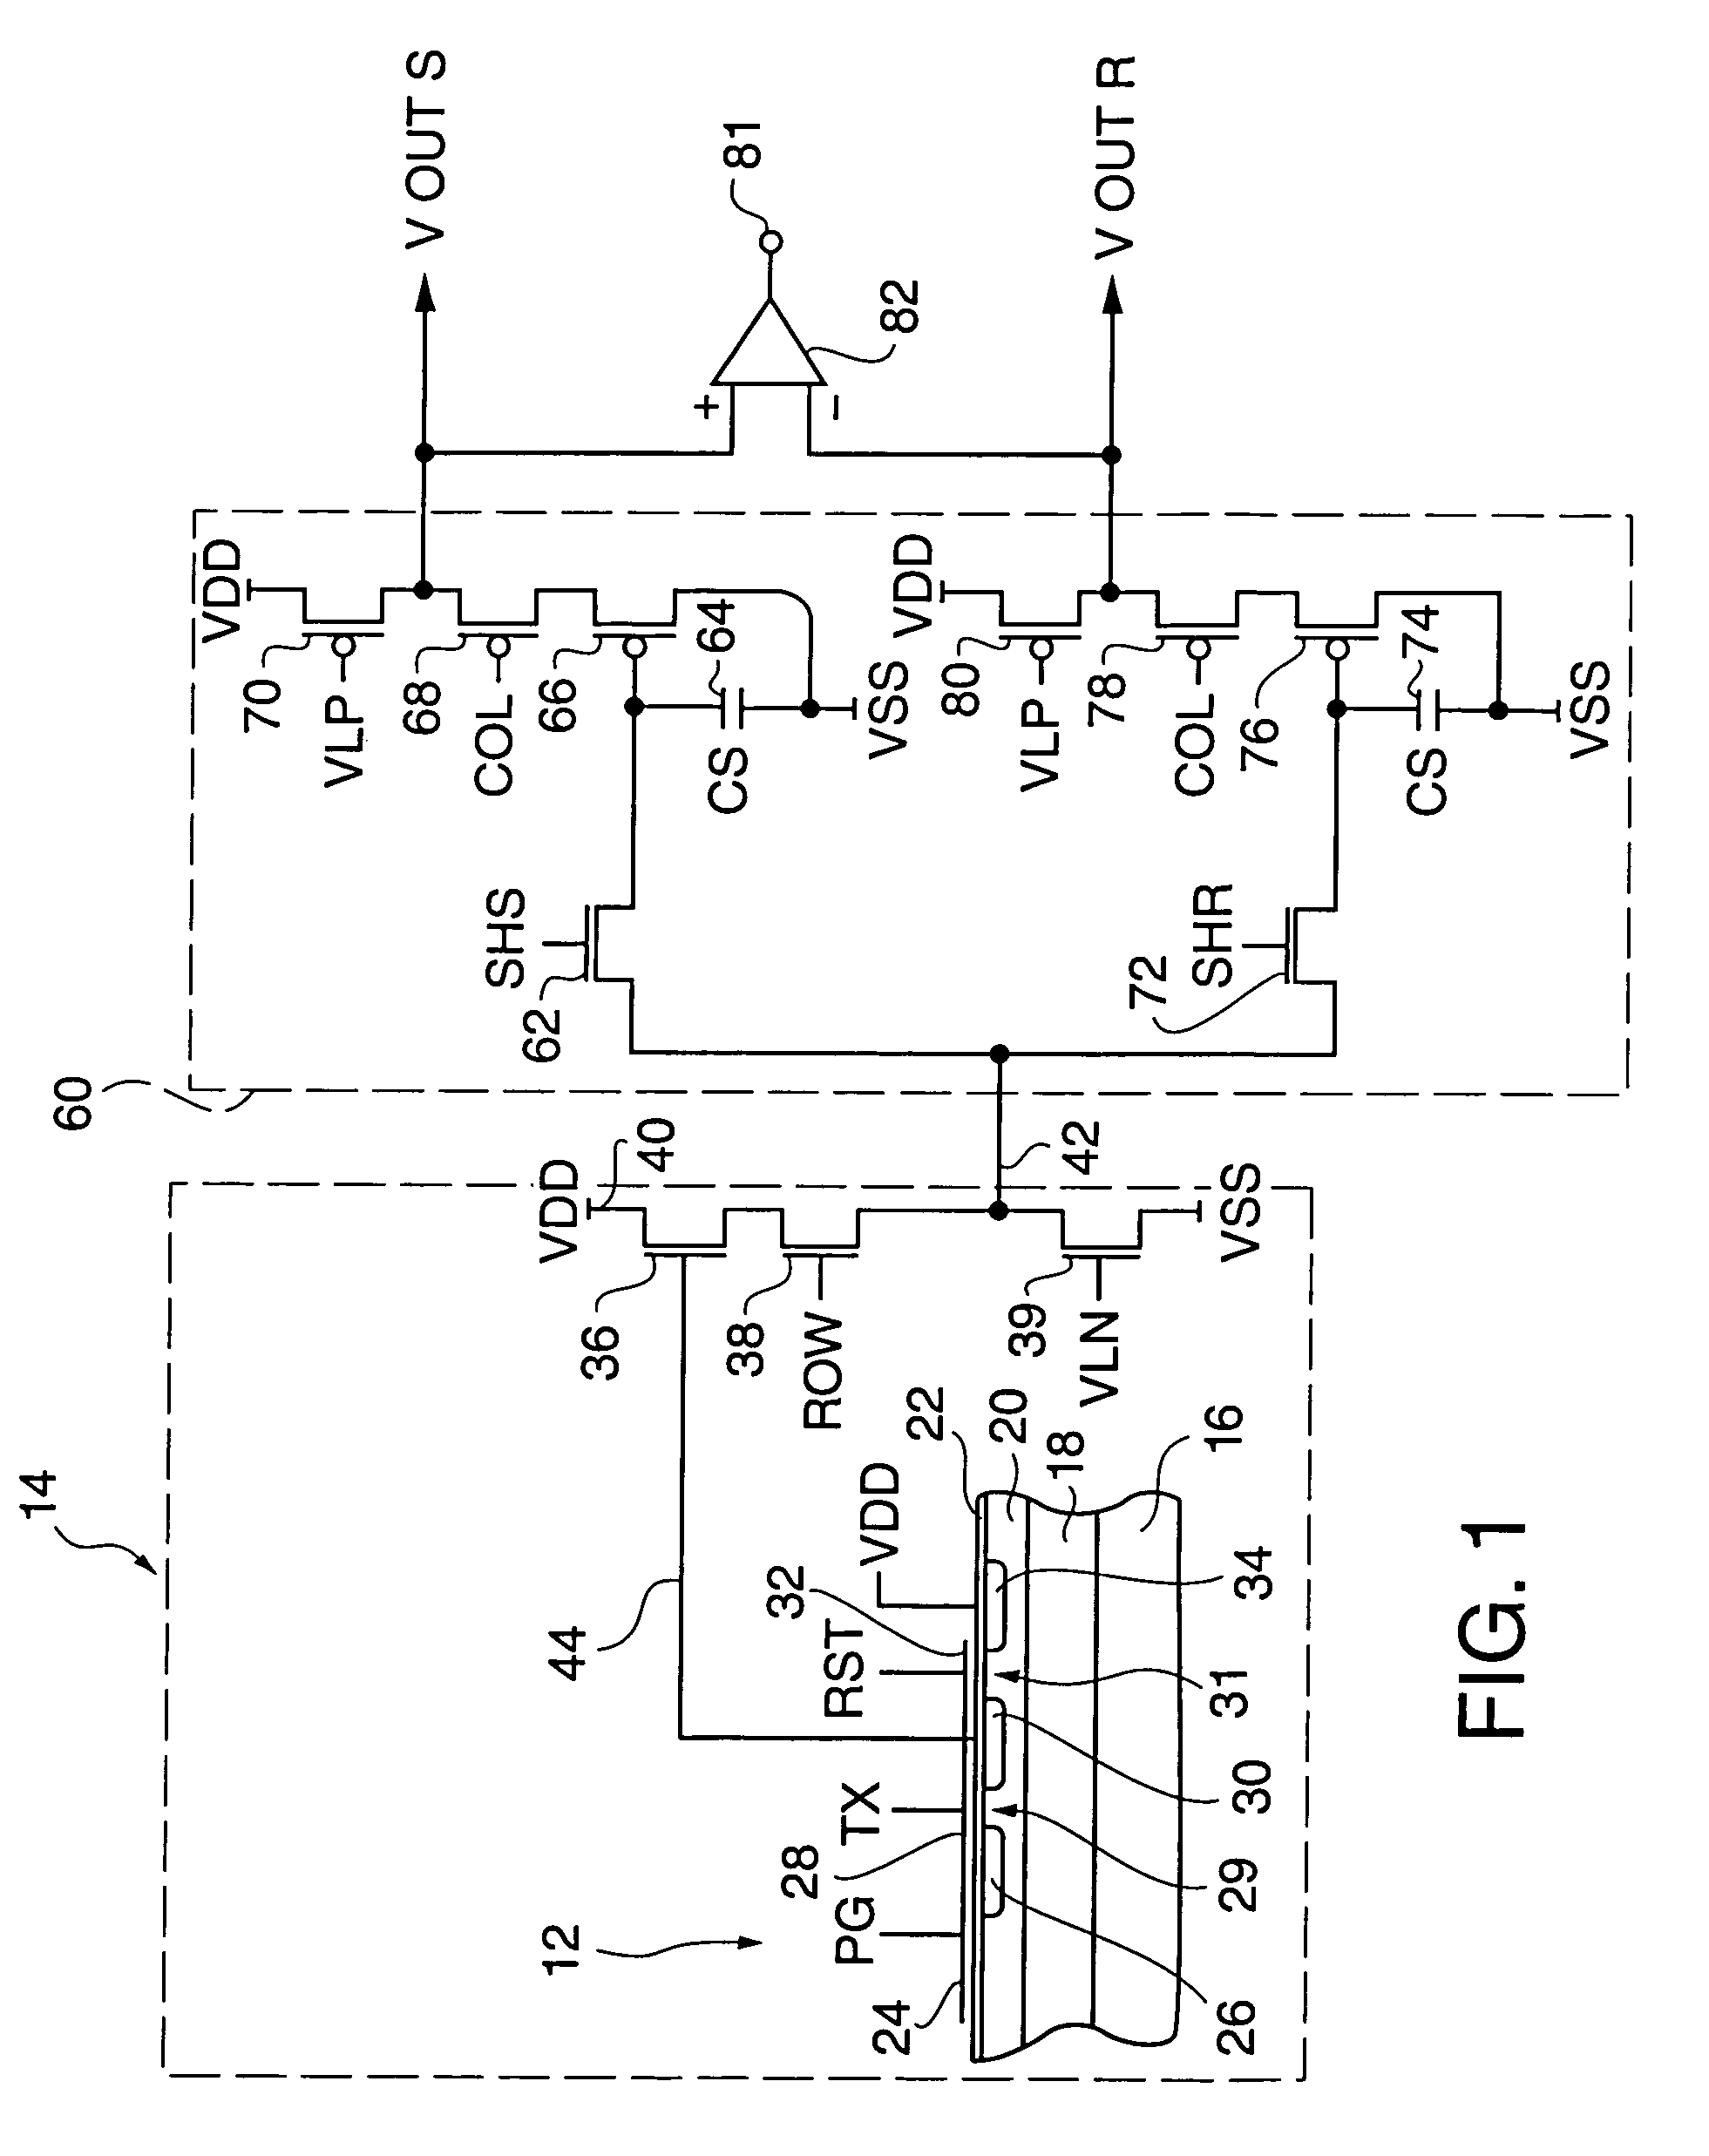 CMOS imager having a nitride dielectric